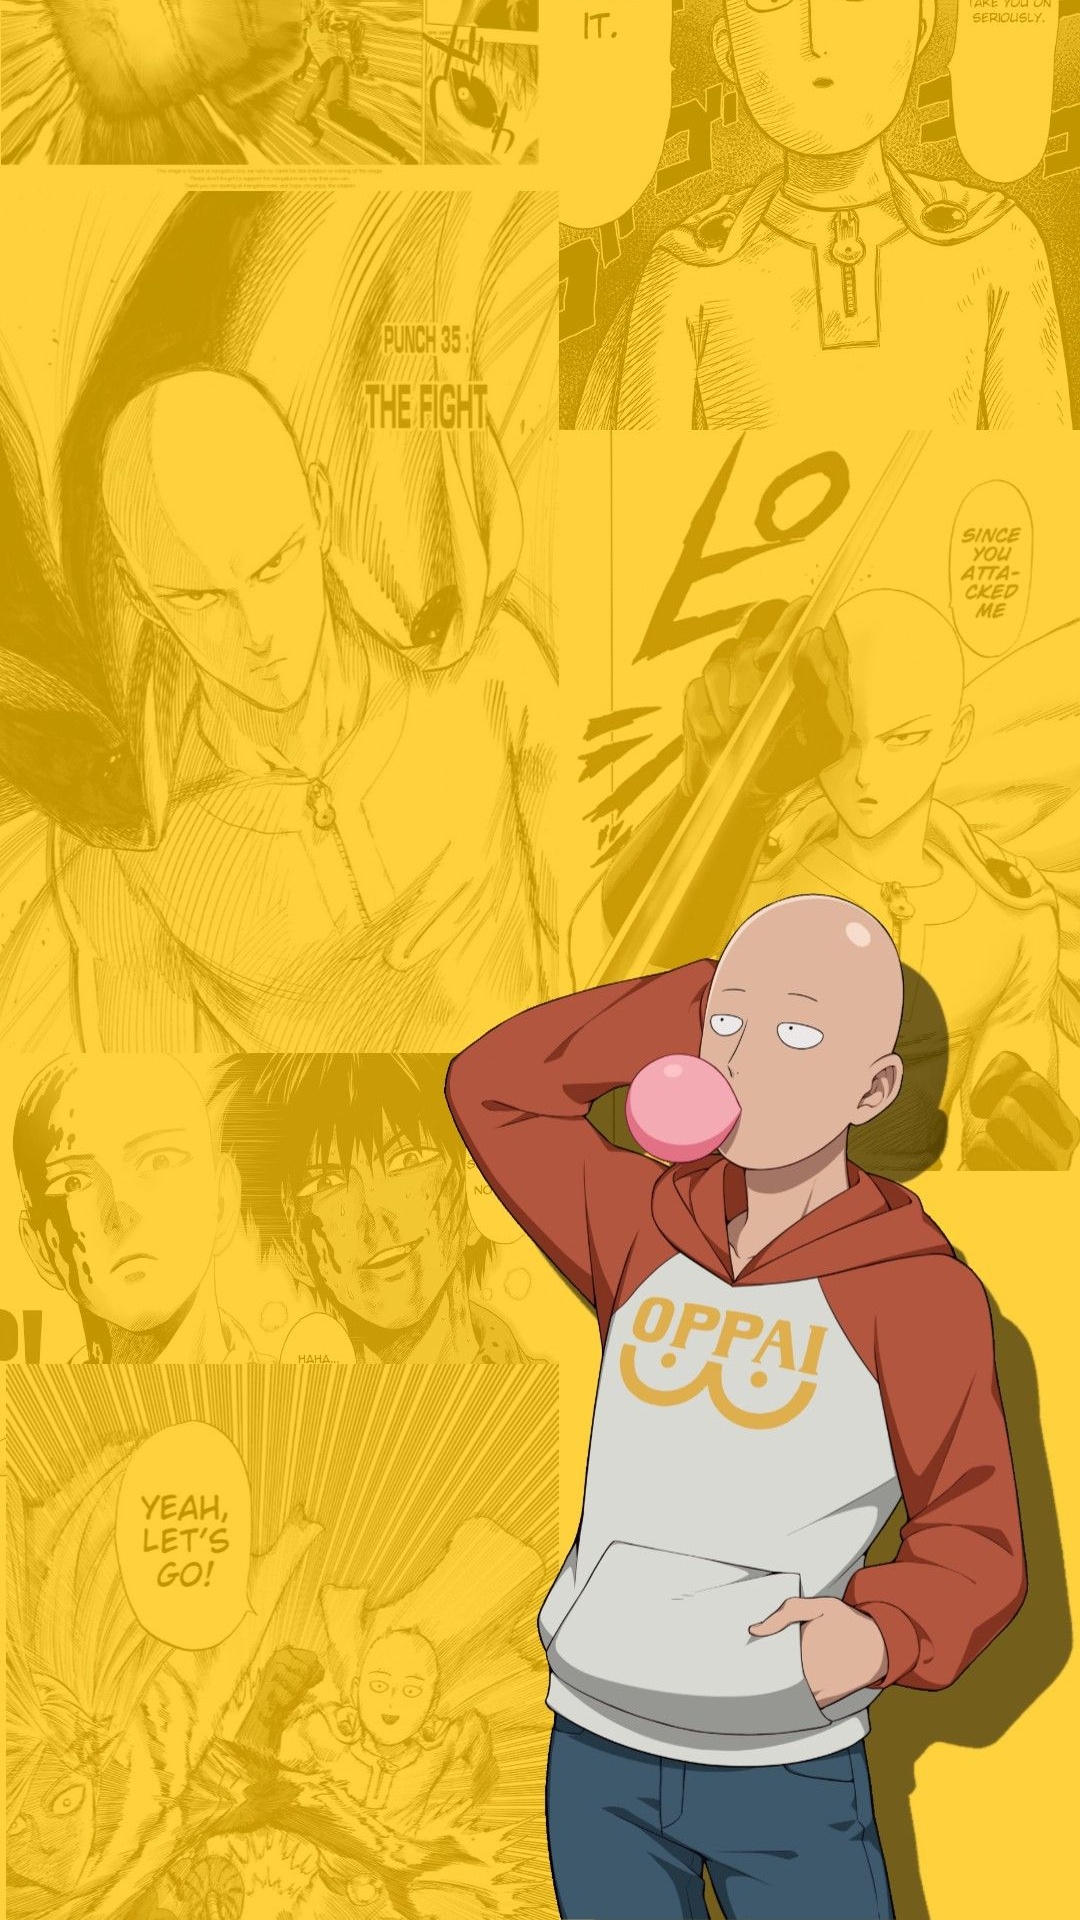 iPhone X Wallpapers: 35 Great Images For An AMOLED Screen  One punch man  anime, One punch man manga, Saitama one punch man